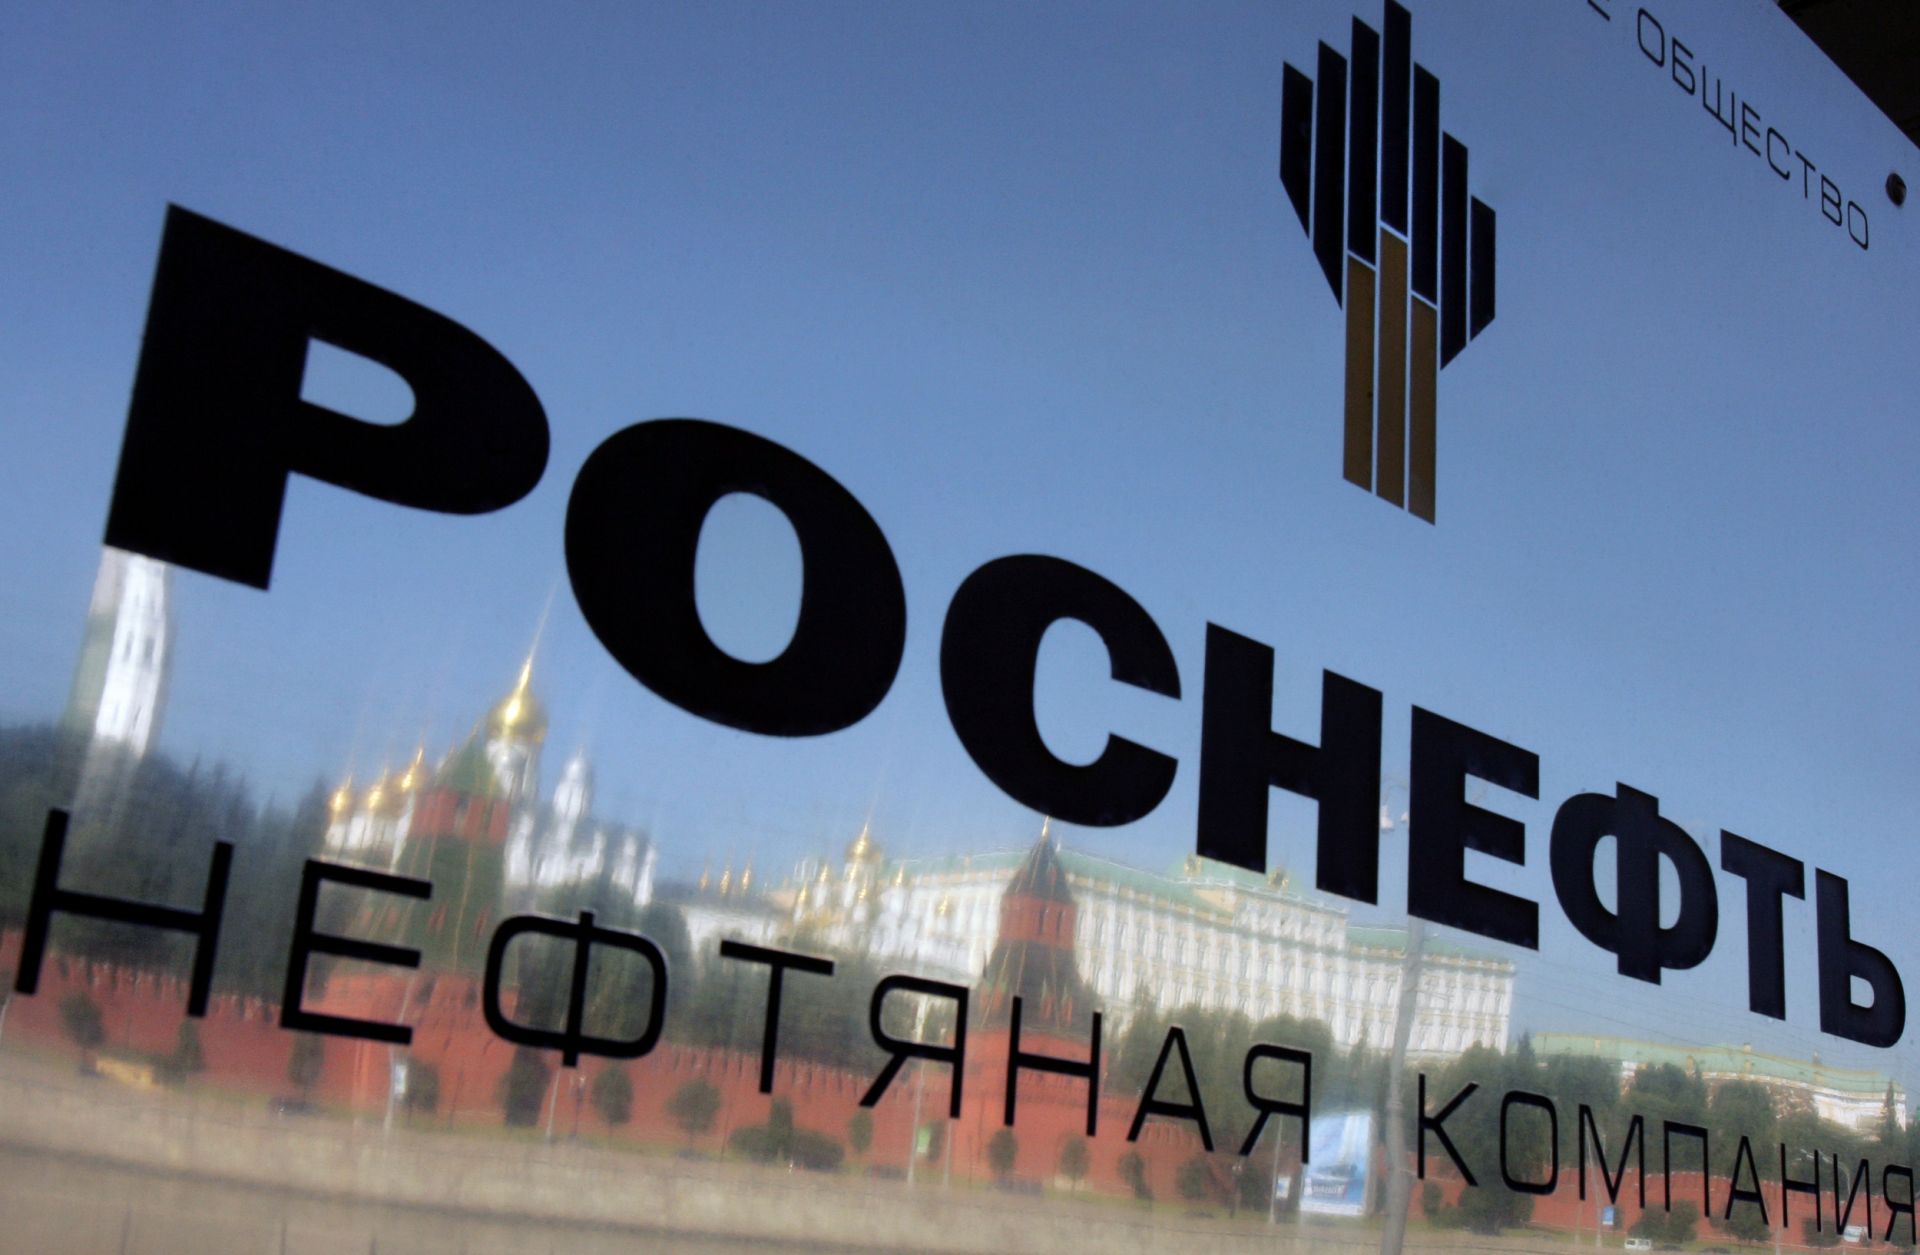 The walls surrounding the Kremlin are reflected on a plaque at the entrance of the oil company Rosneft's headquarters in Moscow. 